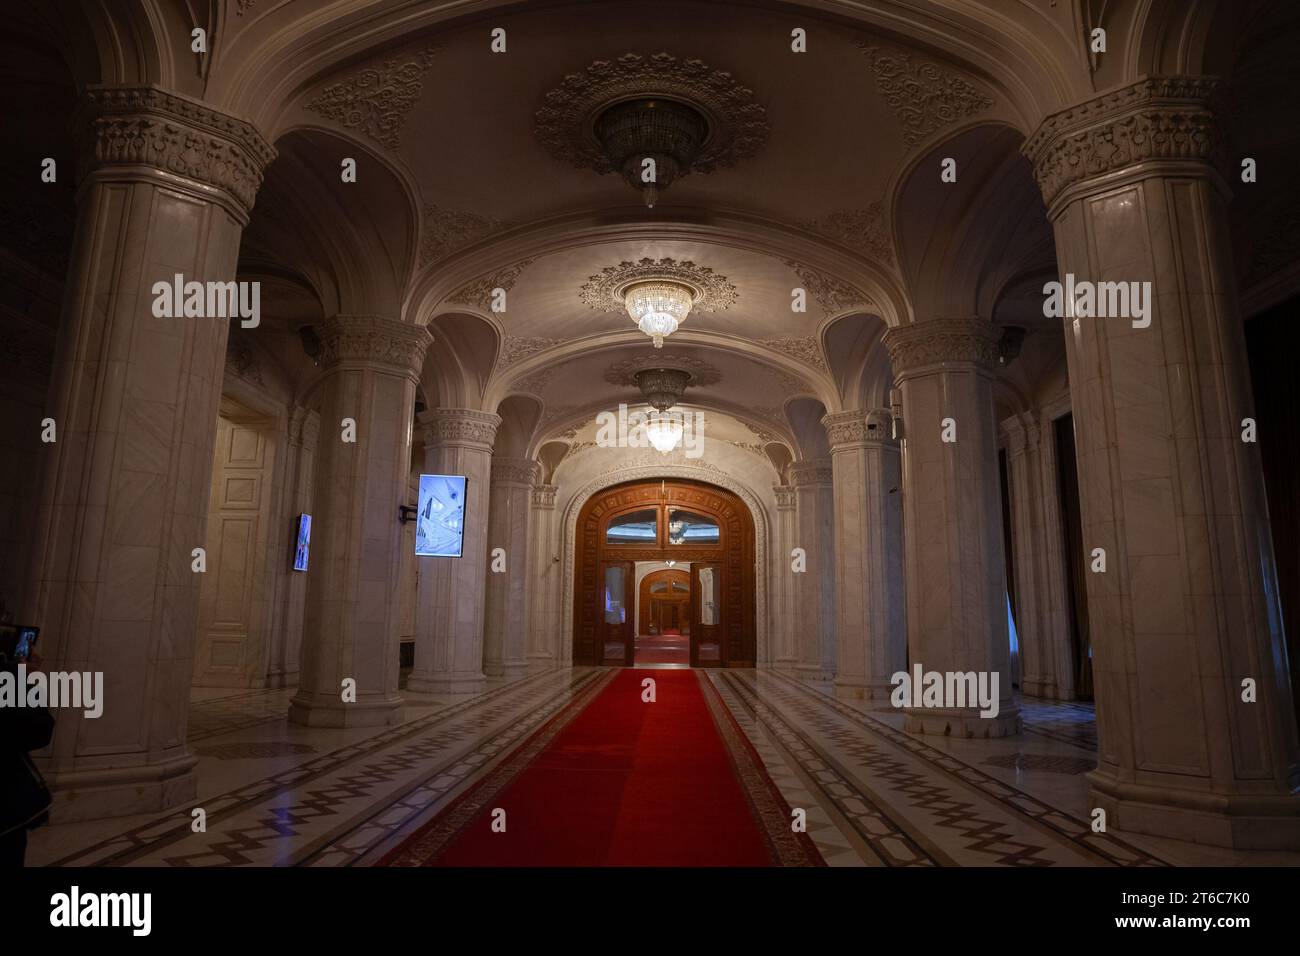 Picture of the interior of the Romanian palace of parliament, with a focus on large wooden doors. The Palace of the Parliament, also known as the Repu Stock Photo